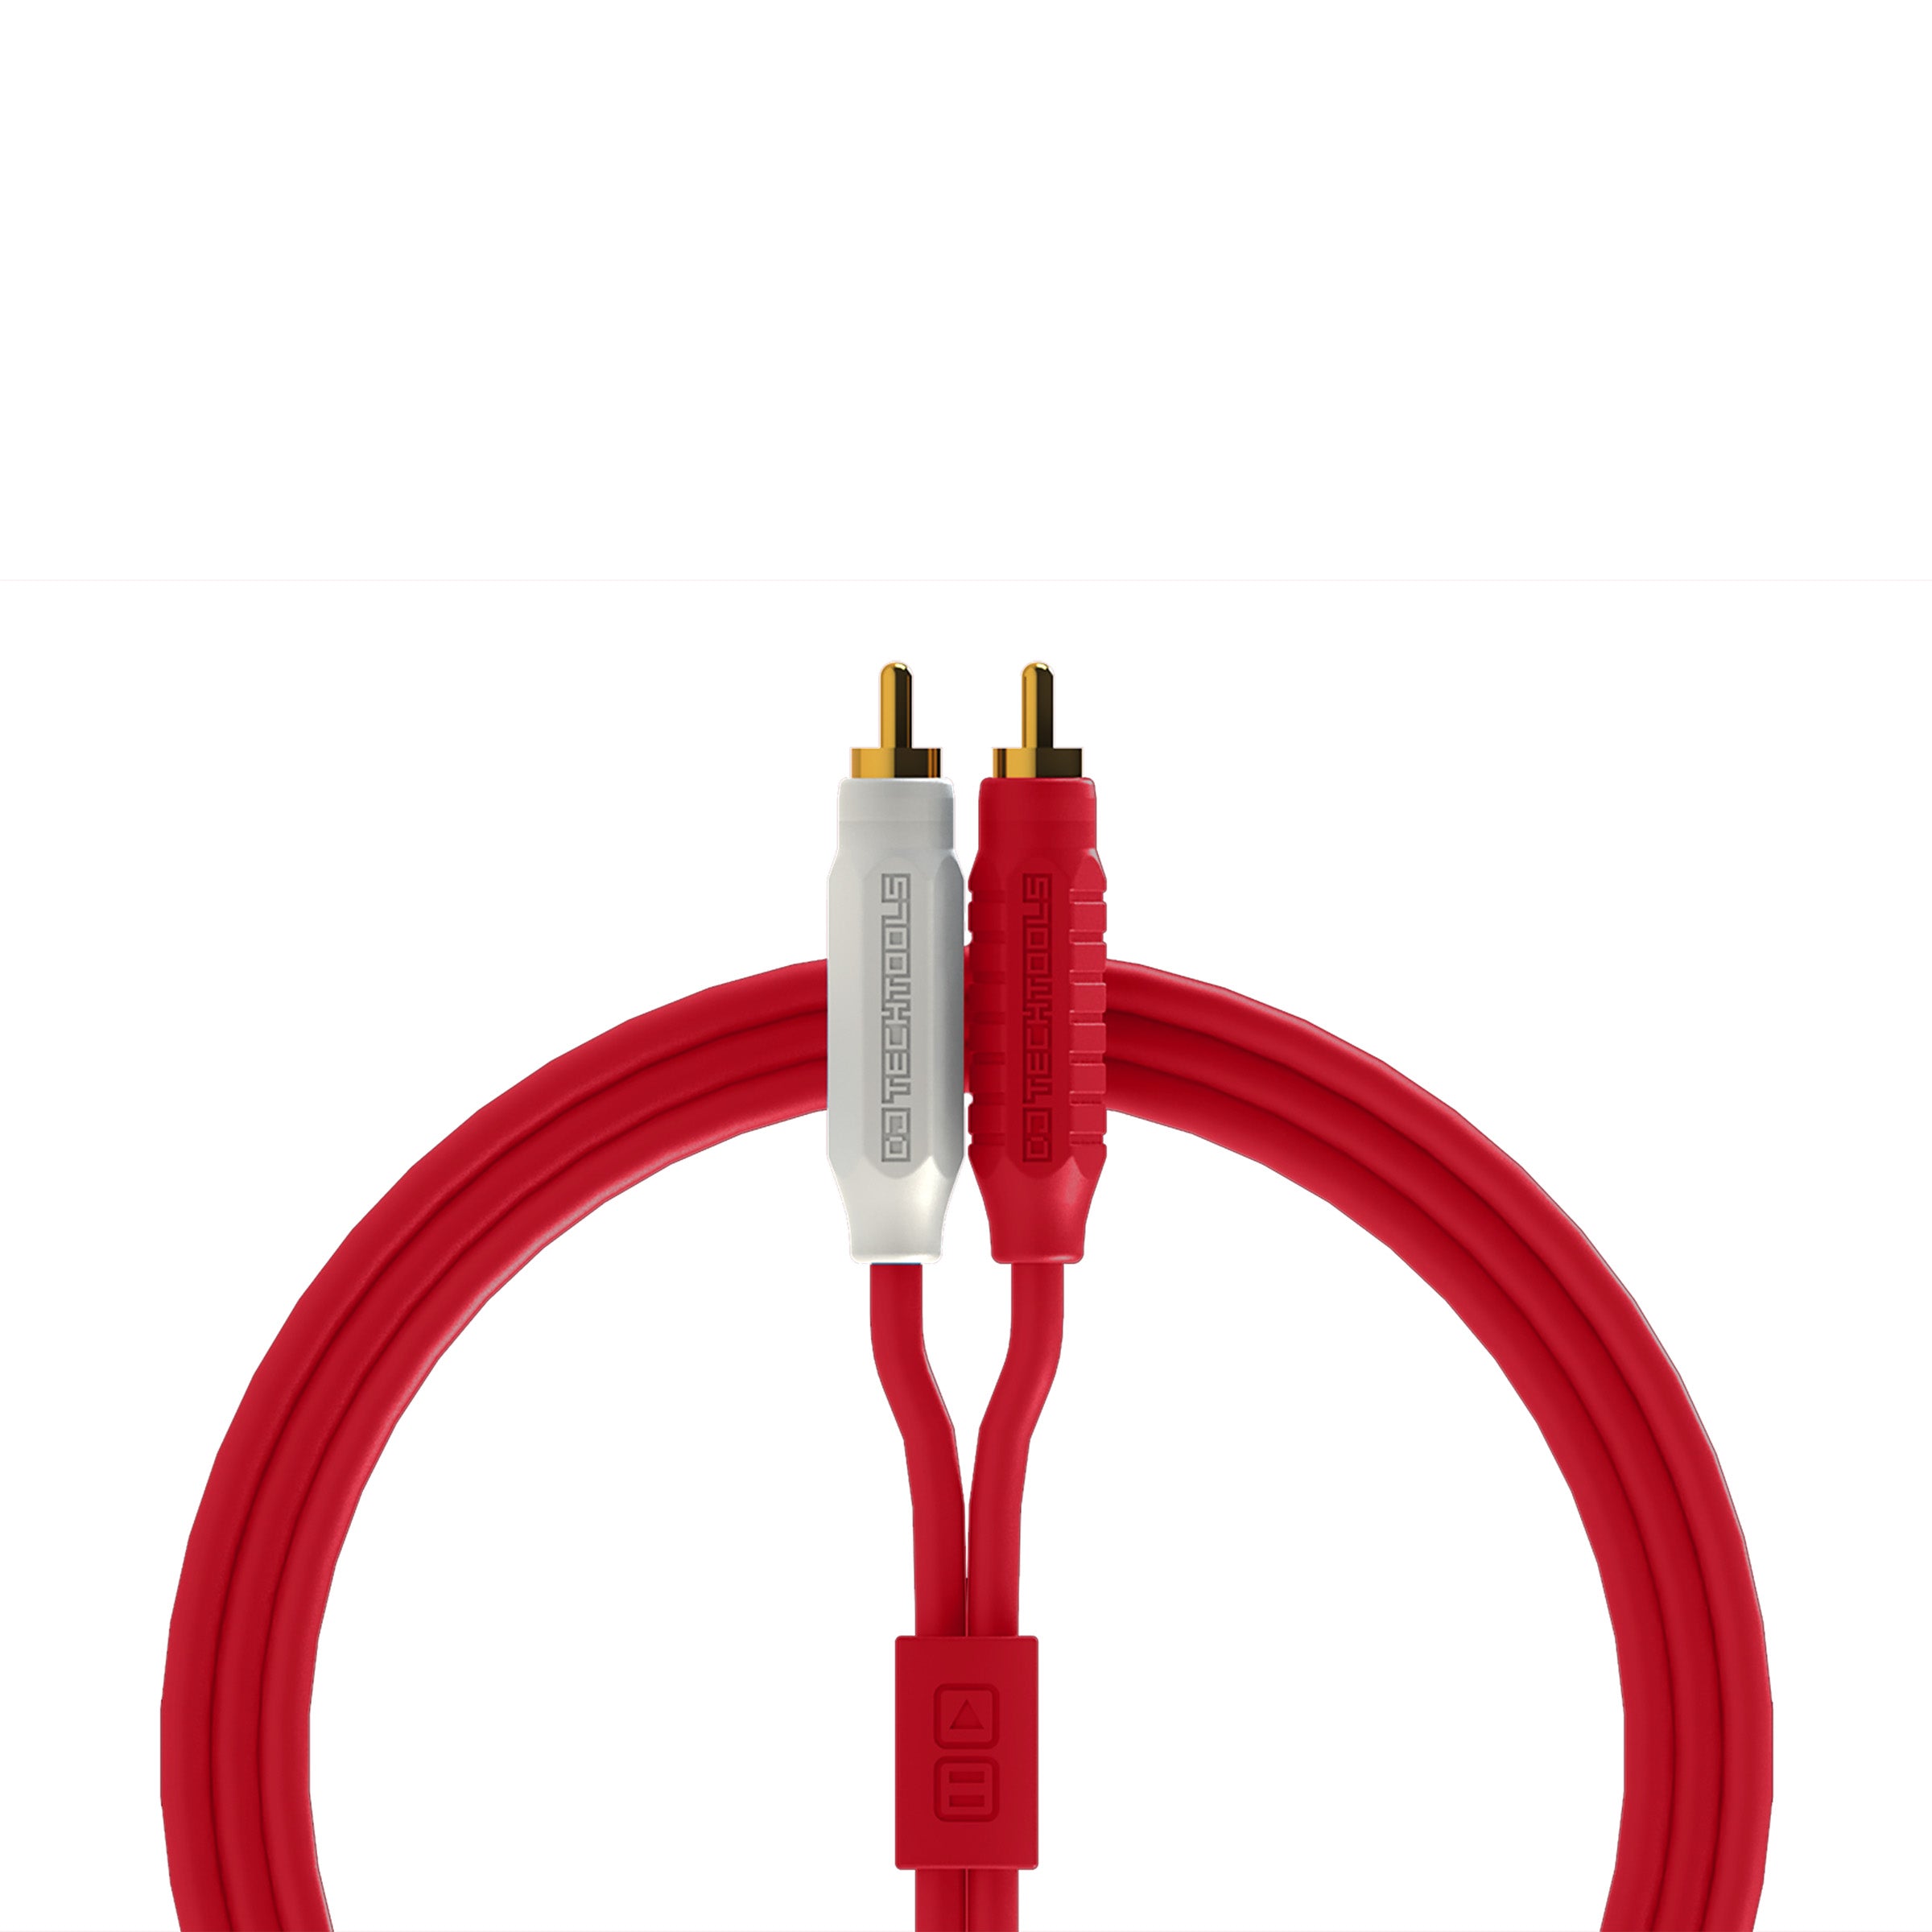 DJ TechTools Chroma Cables Audio RCA to RCA 2m  - Red